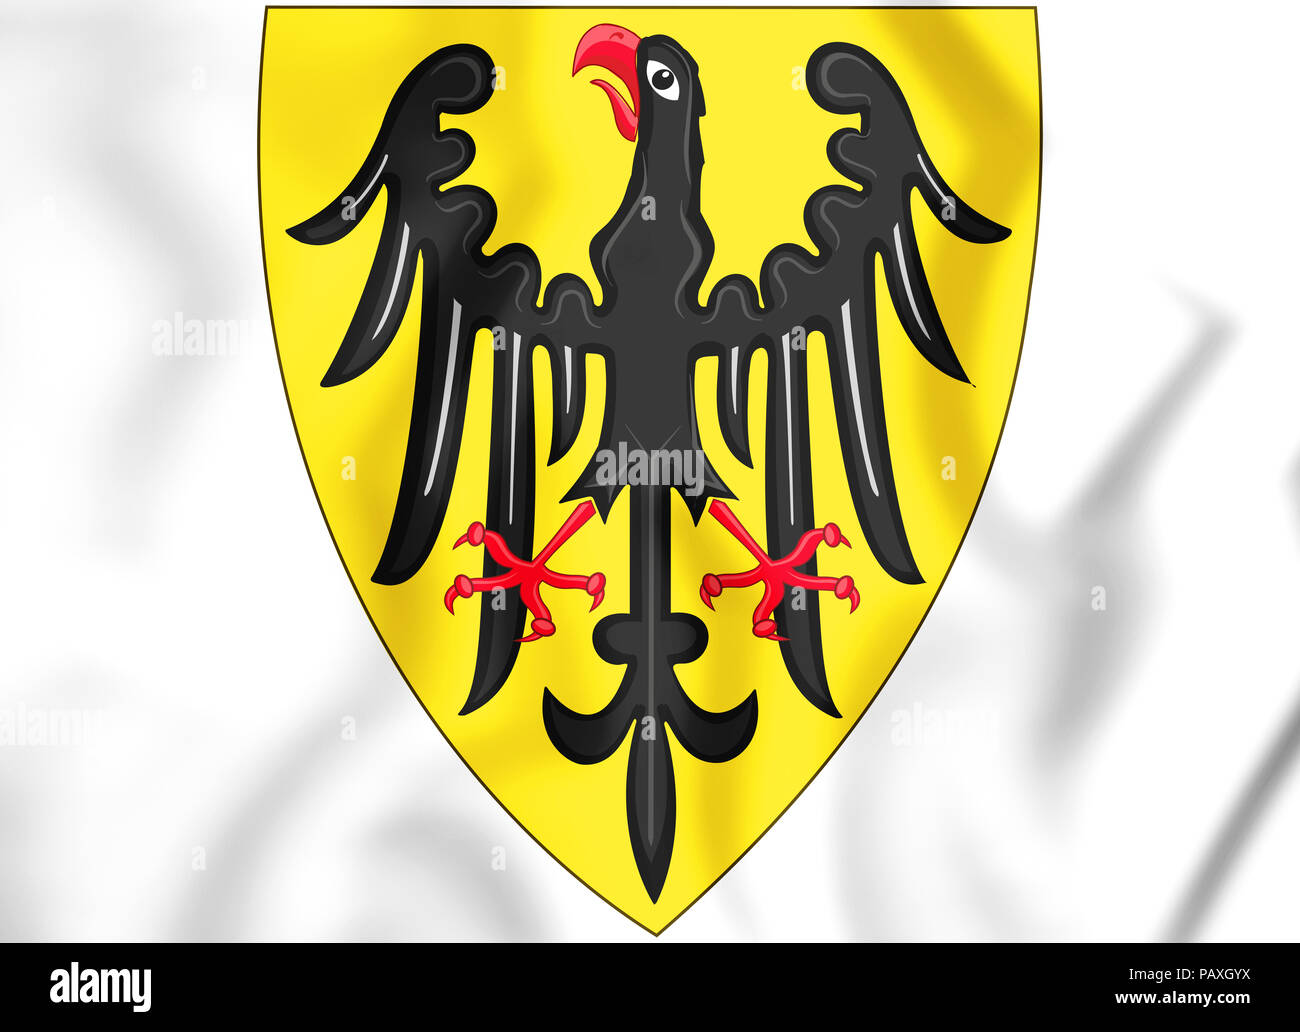 3D Holy Roman Empire coat of arms (1200-1300). 3D Illustration. Stock Photo